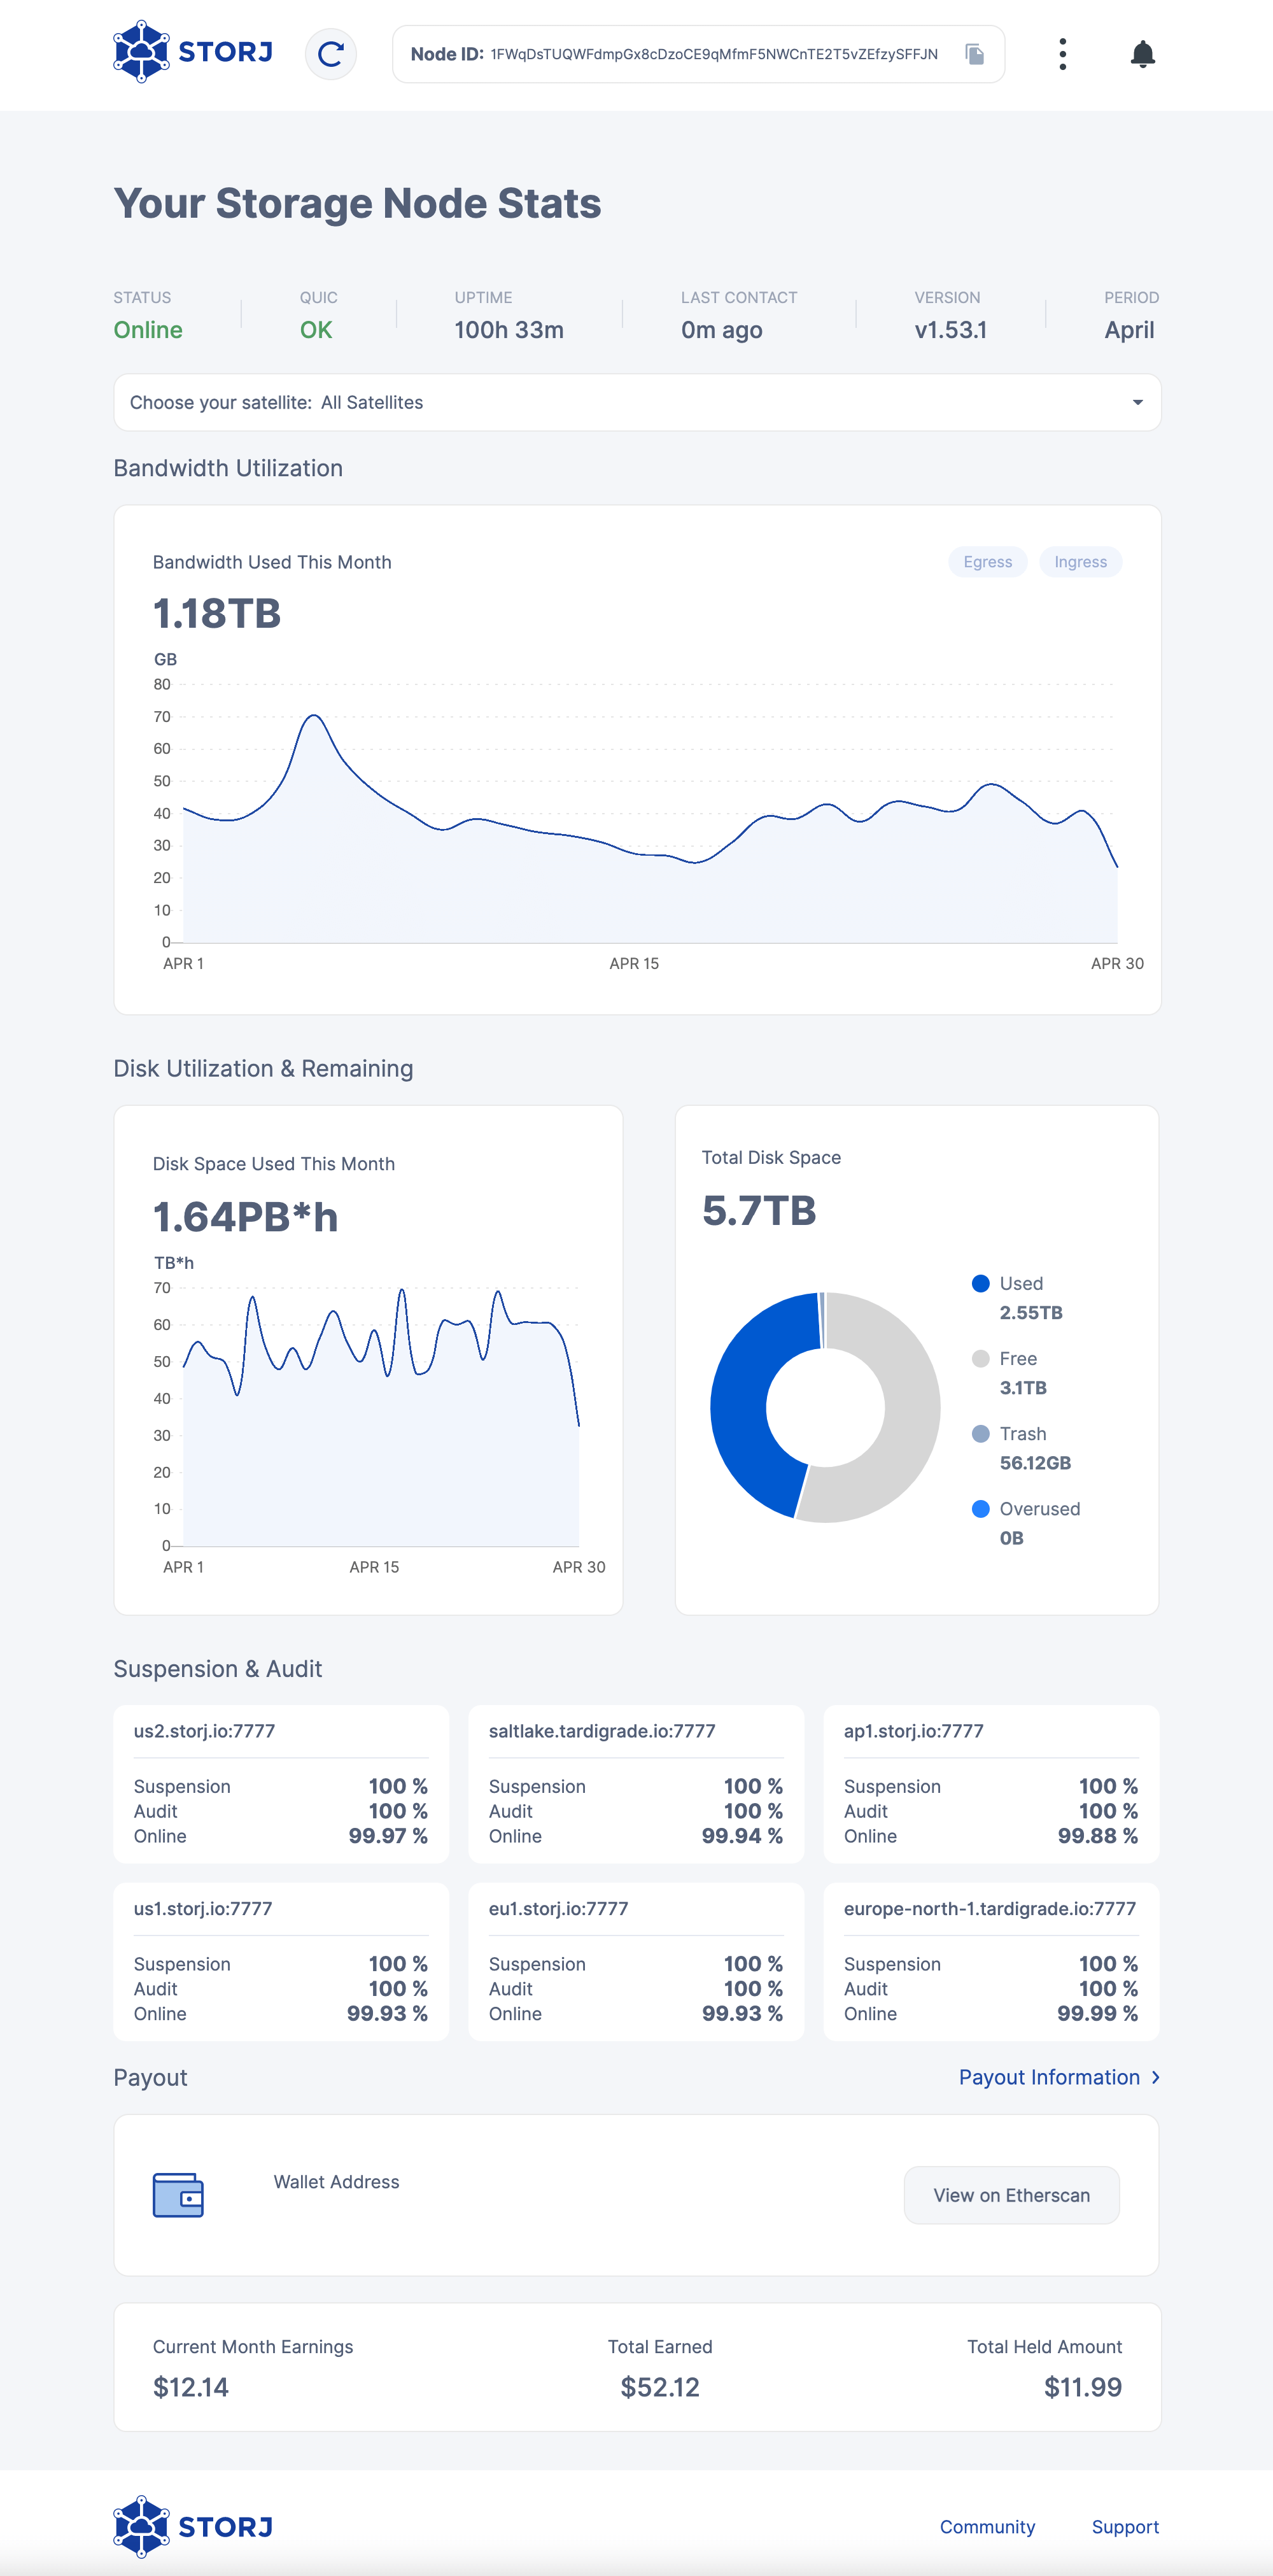 Storj Dashboard end of April 2022. Bandwidth used: 1.18 TB. Hours of storage used: 1.64 PB*h. Total available storage: 5.7 TB. Used storage: 2.55 TB. Free disk space: 3.1 TB. Recycle bin: 56.12 GB. Earnings this month: $12.14. Total earnings: $52.12. Withheld earnings: $11.99.